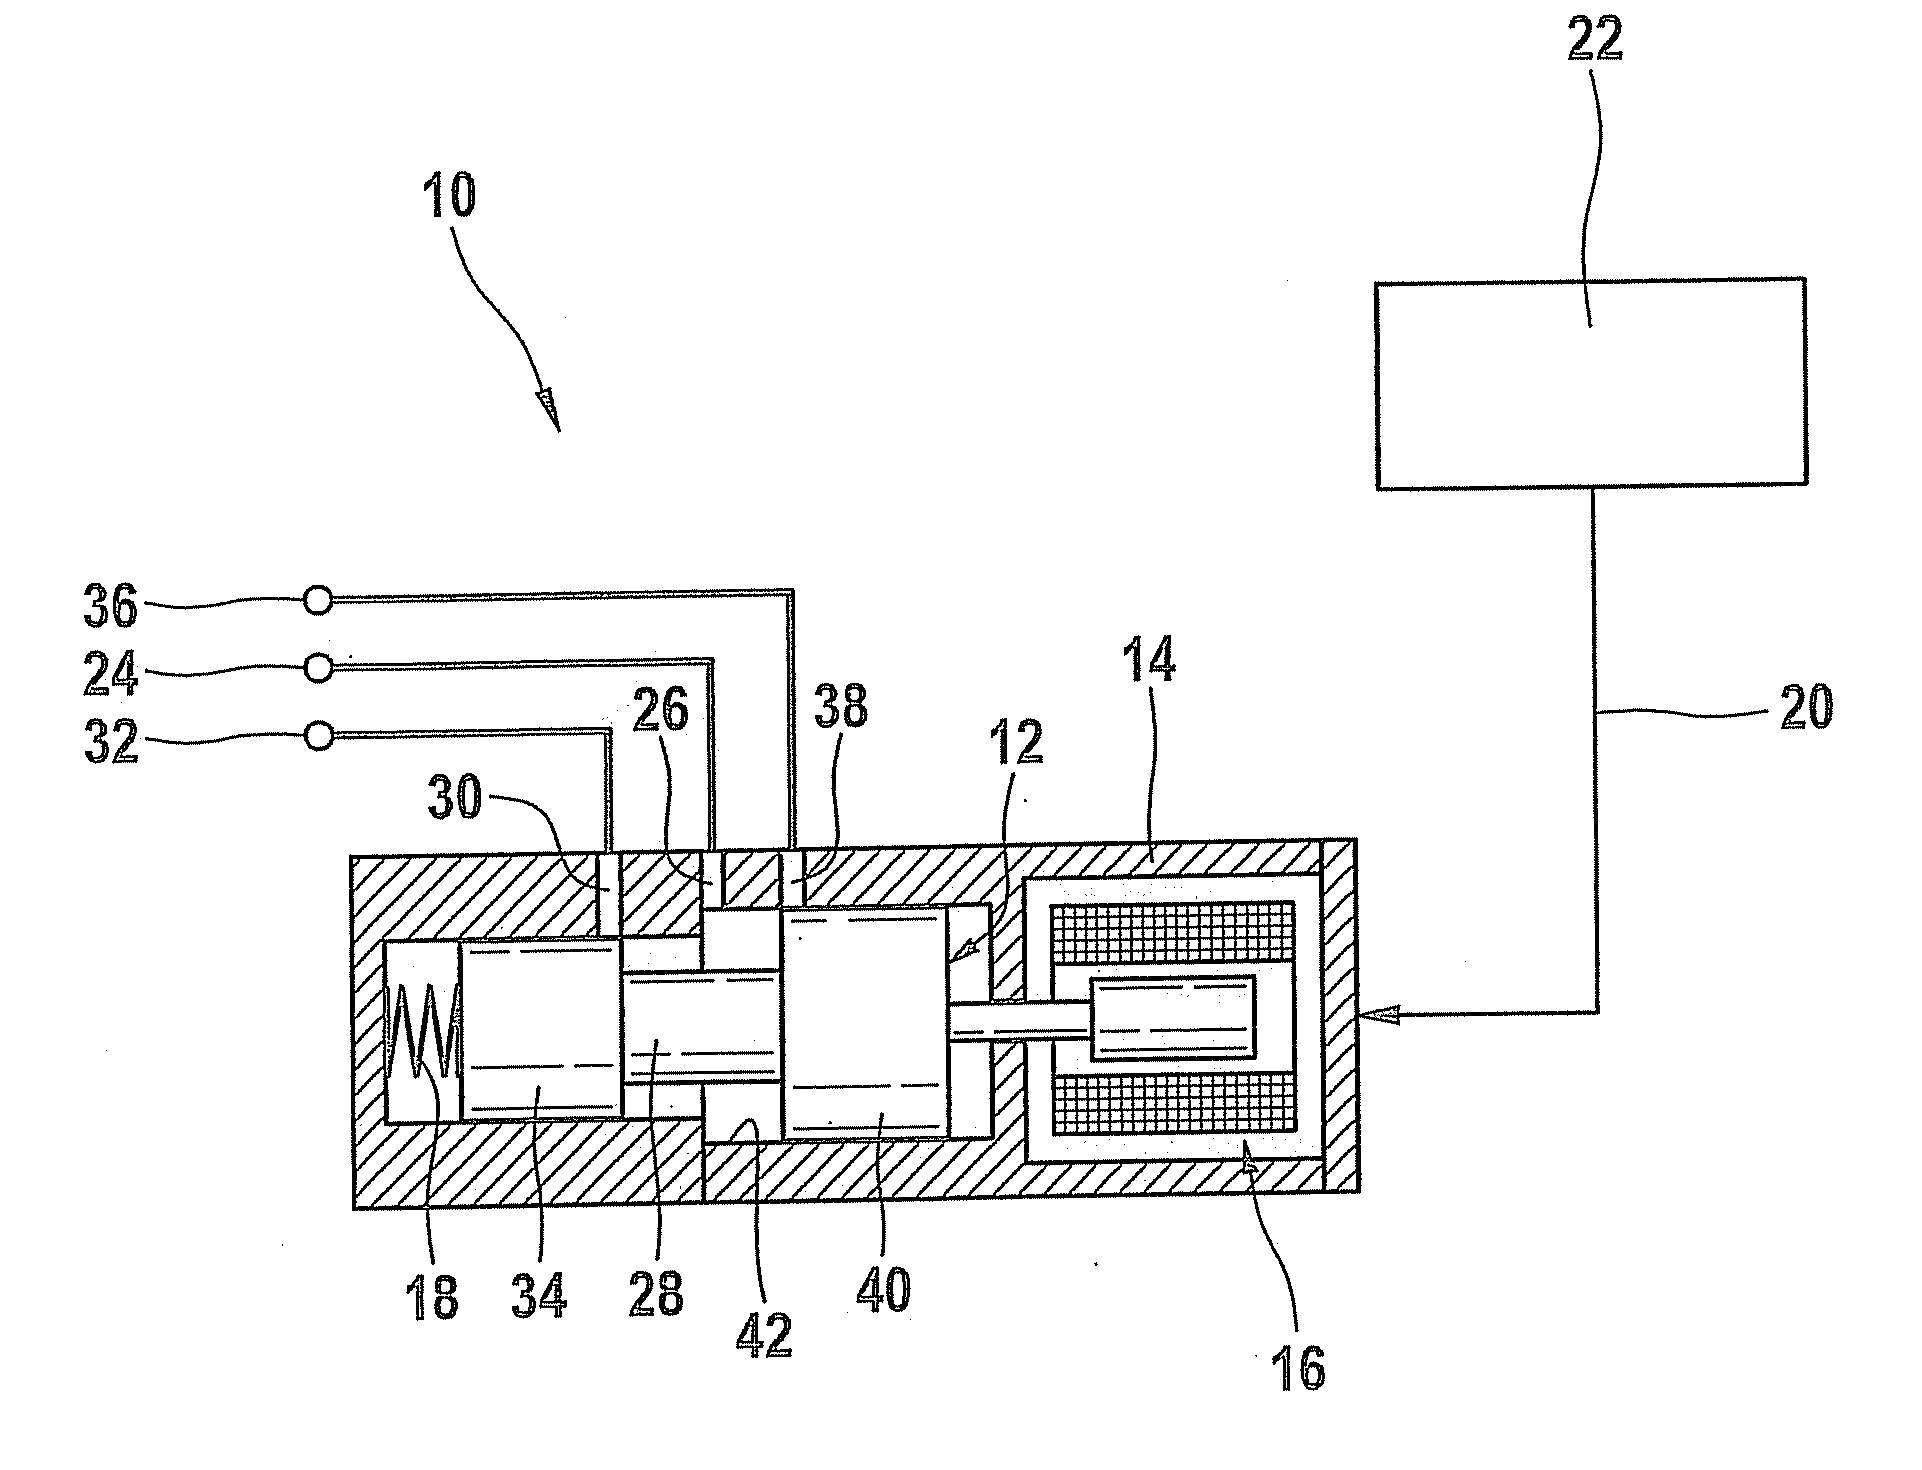 Method for operating a mechanical system, particularly a proportioning valve